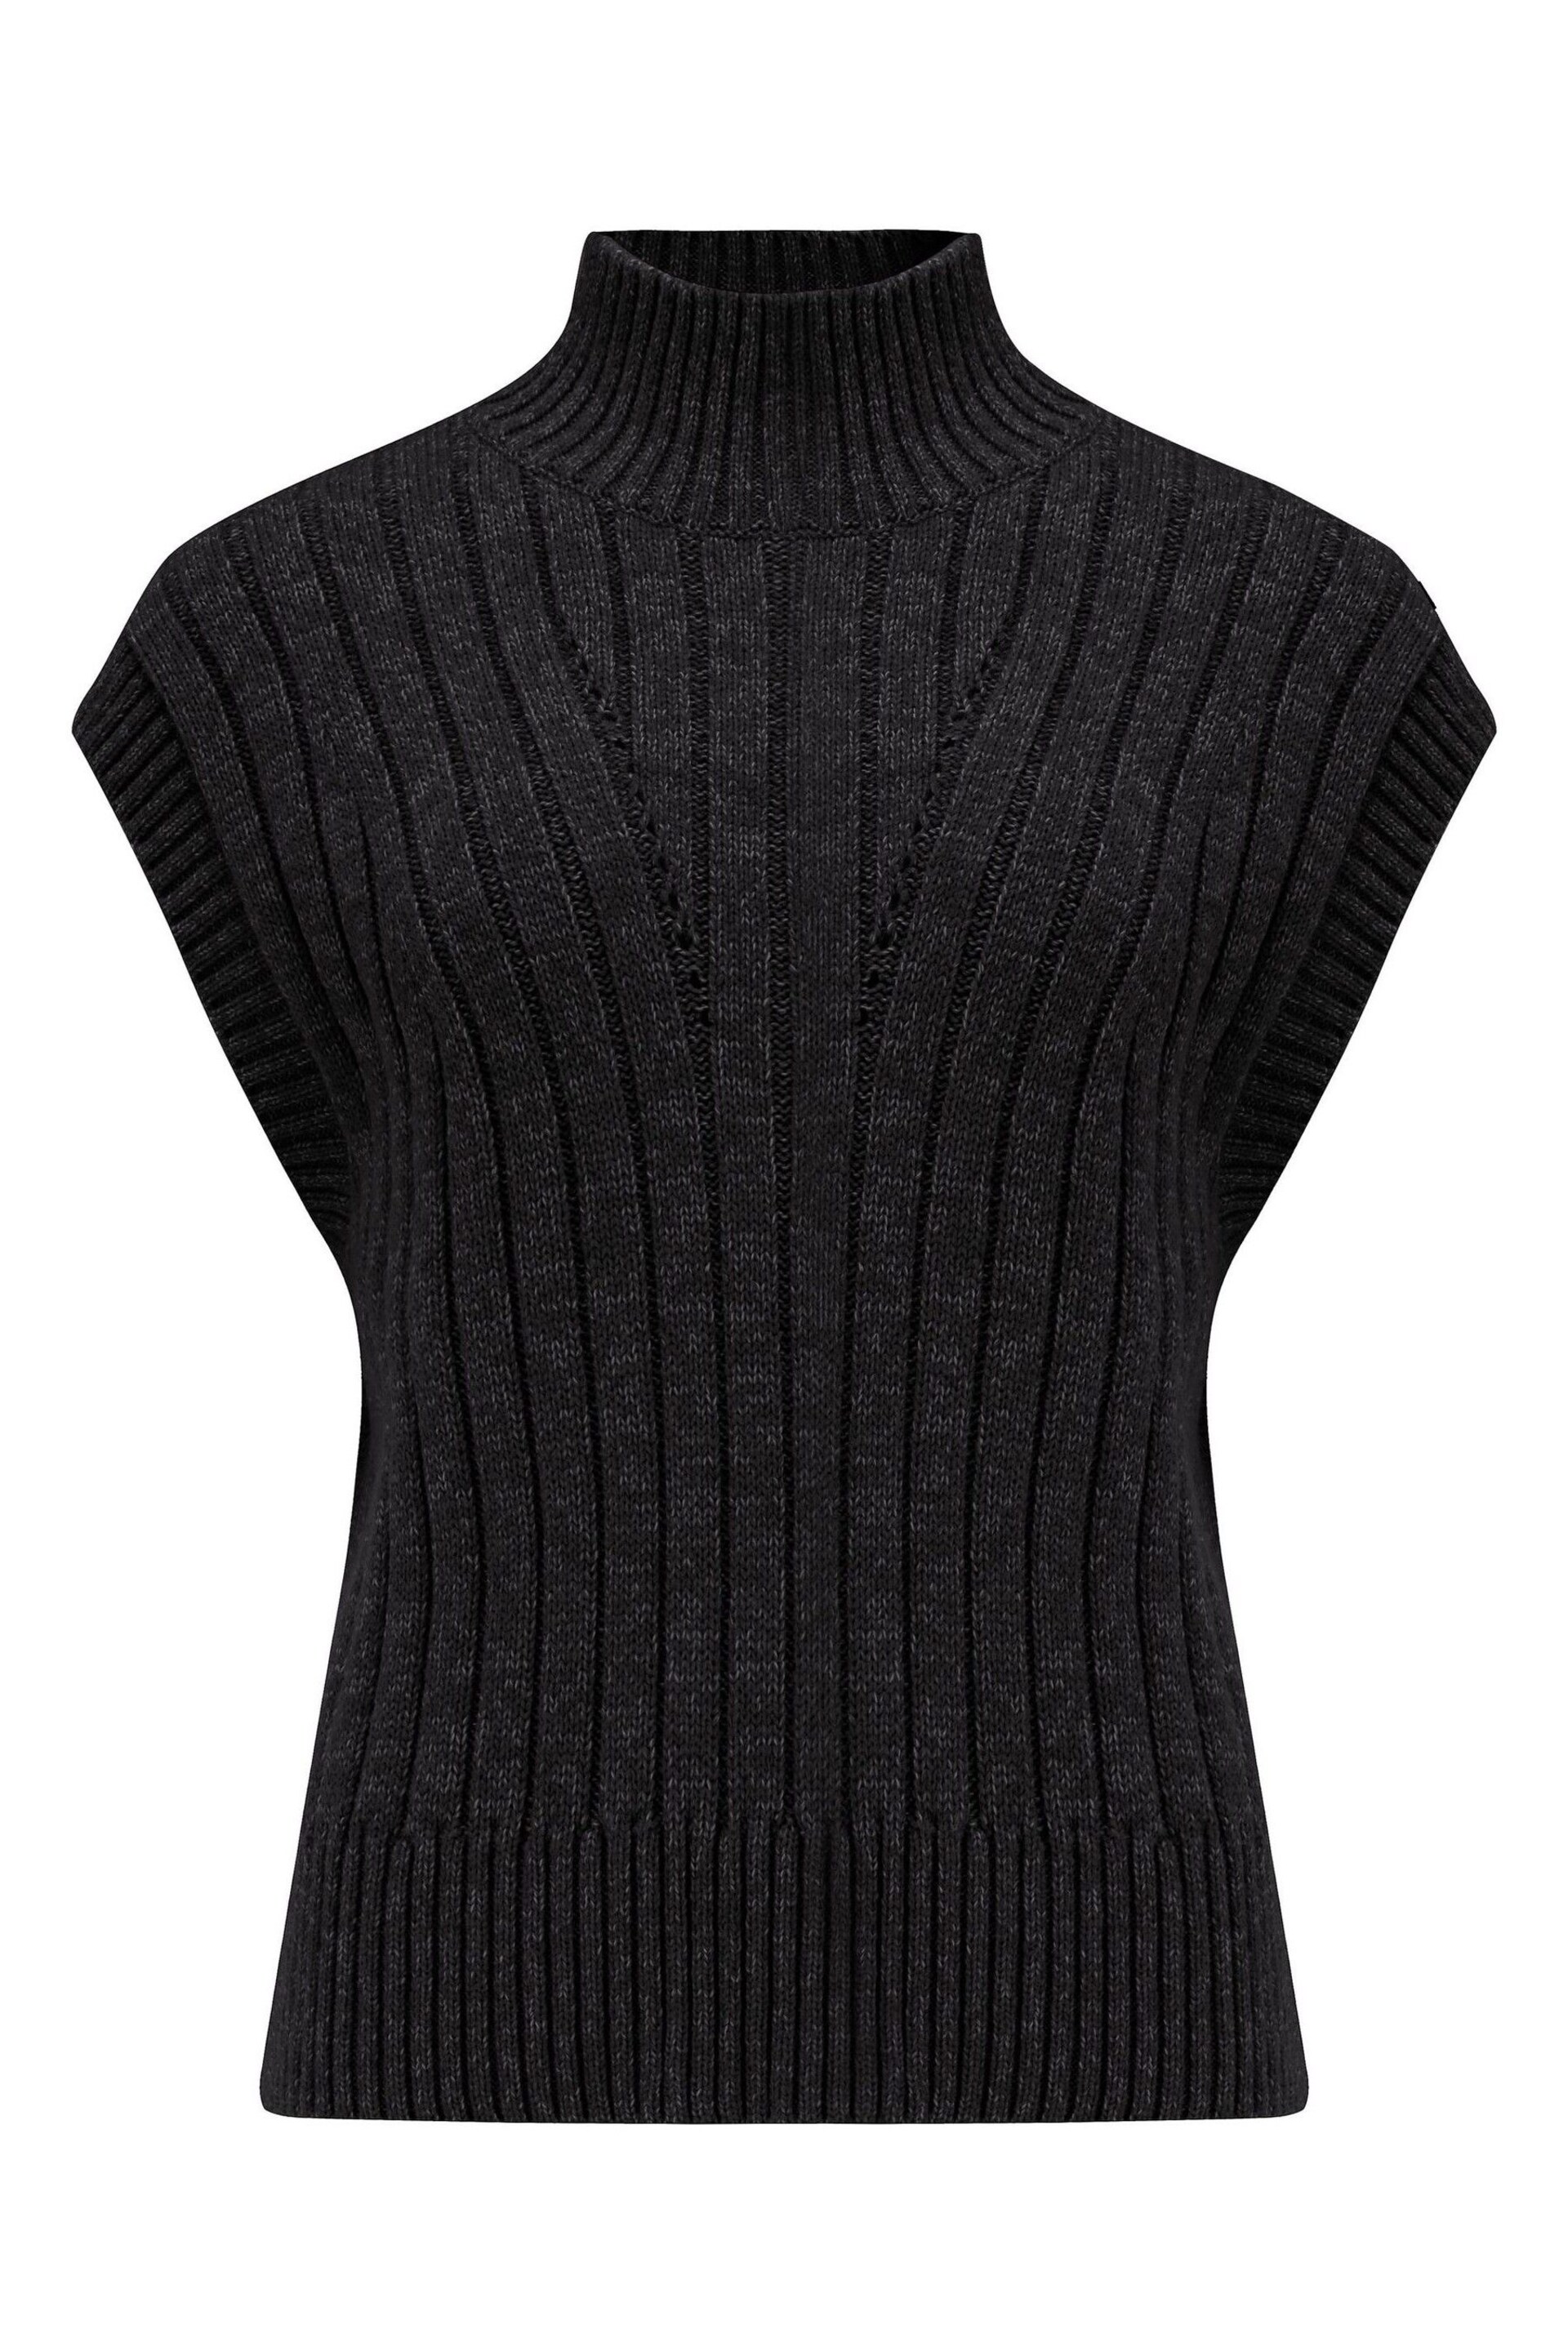 Pour Moi Black Kady Cropped Ribbed Knit Tank Top - Image 3 of 4